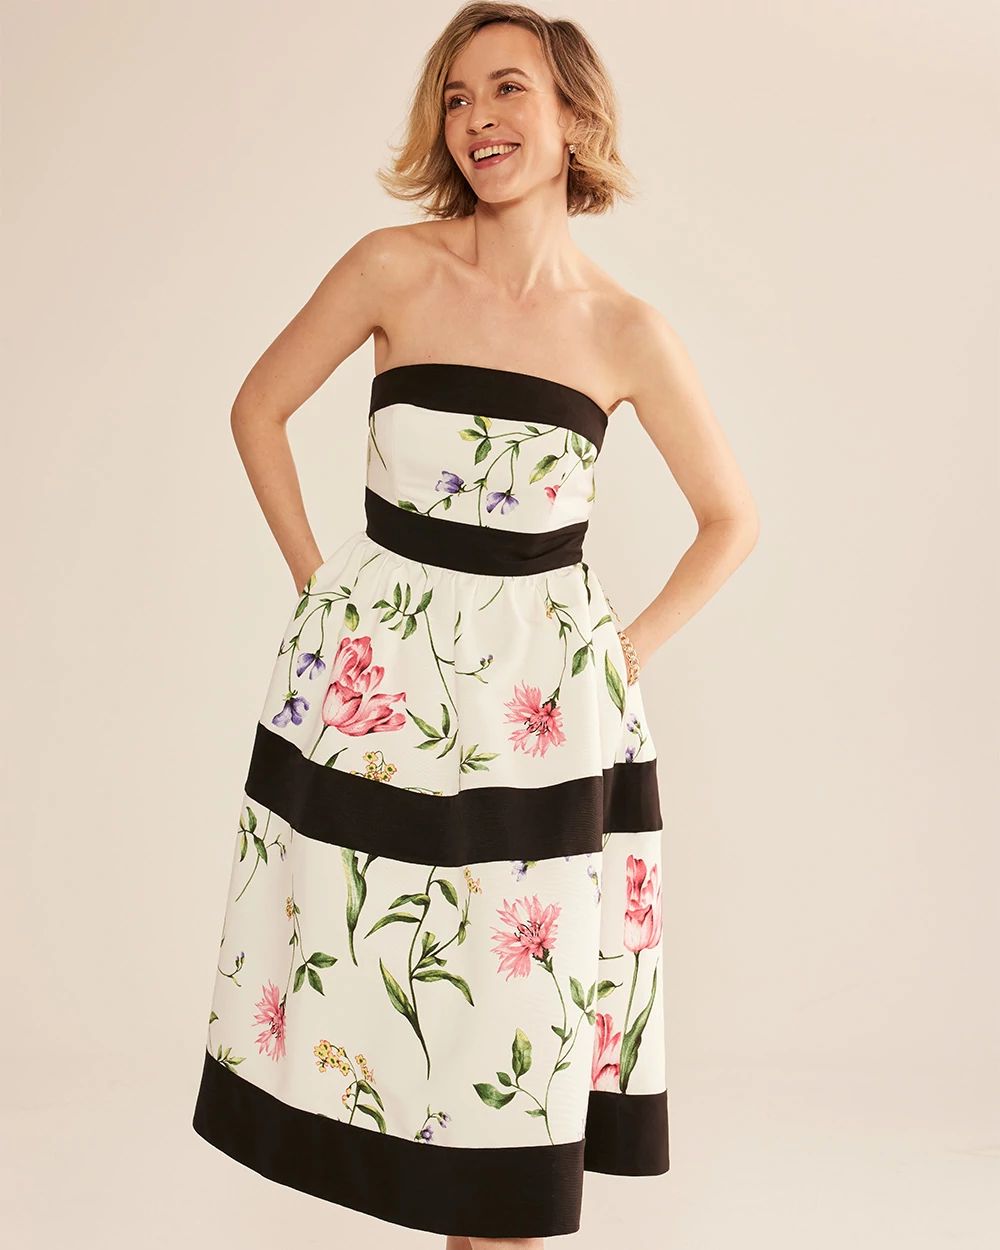 Strapless Floral Contrast Fit & Flare Dress